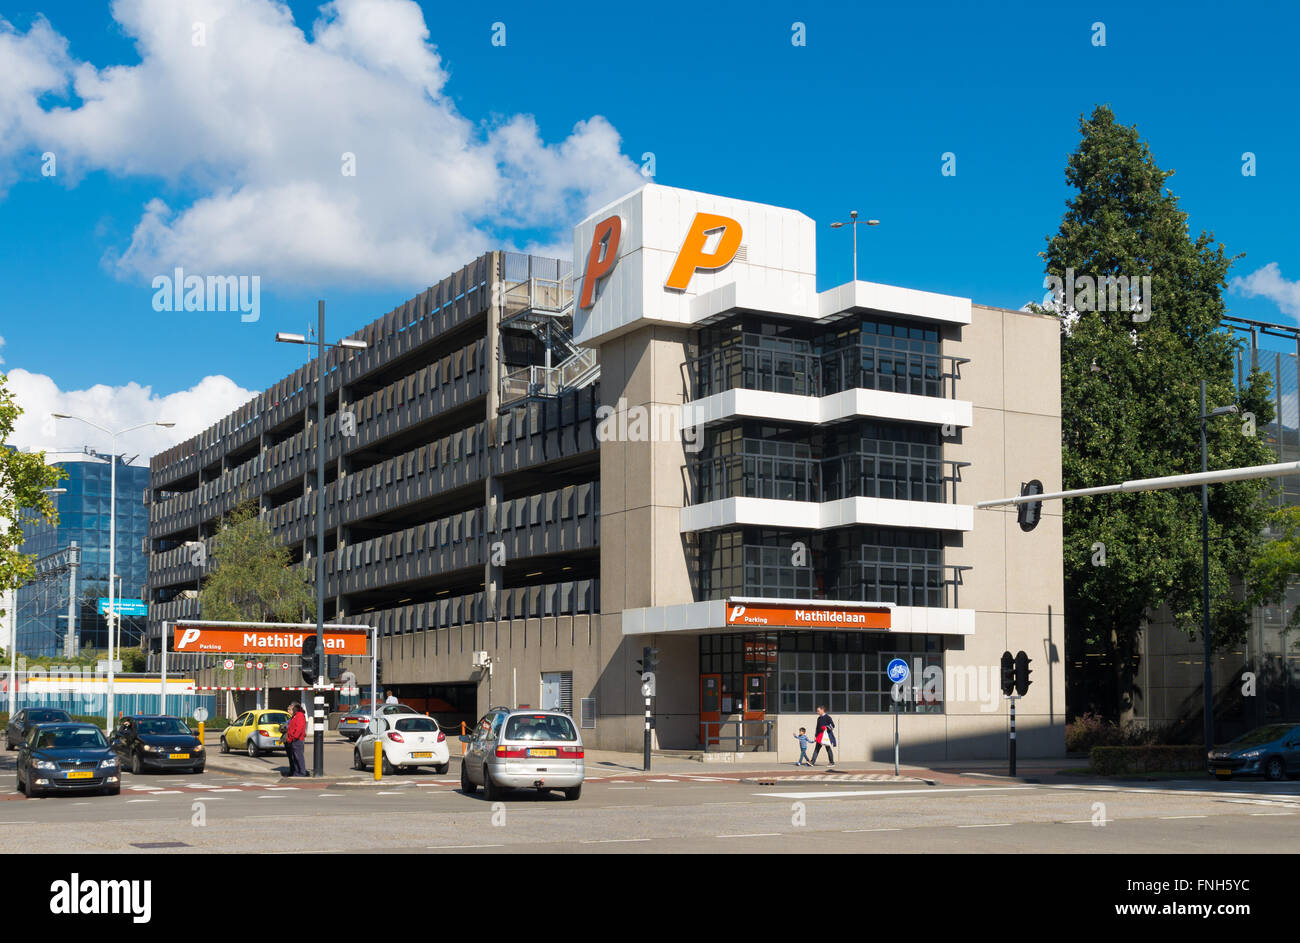 EINDHOVEN, NETHERLANDS - AUGUST 26, 2015: Exterior of a parking garage in the center of Eindhoven Stock Photo